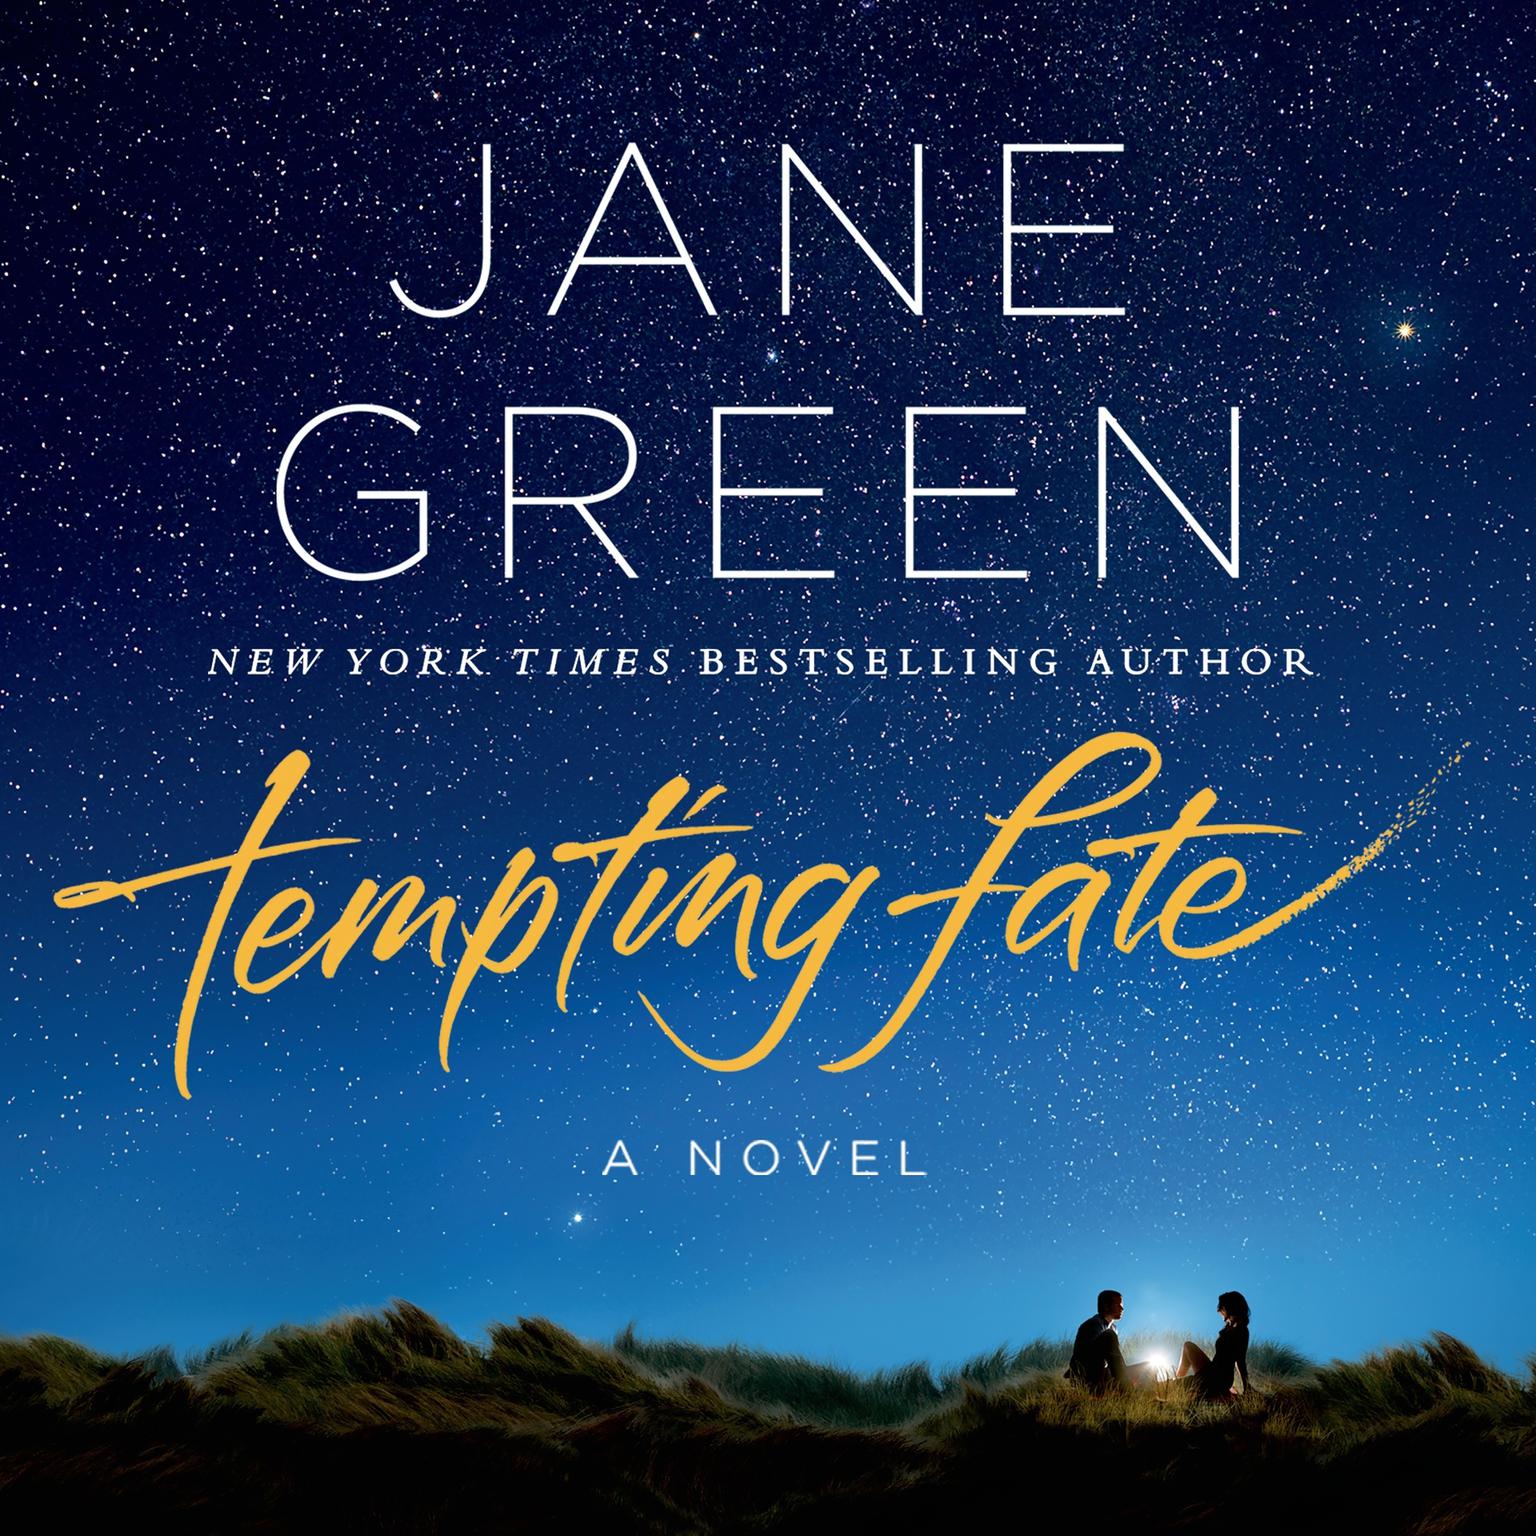 Tempting Fate: A Novel Audiobook, by Jane Green